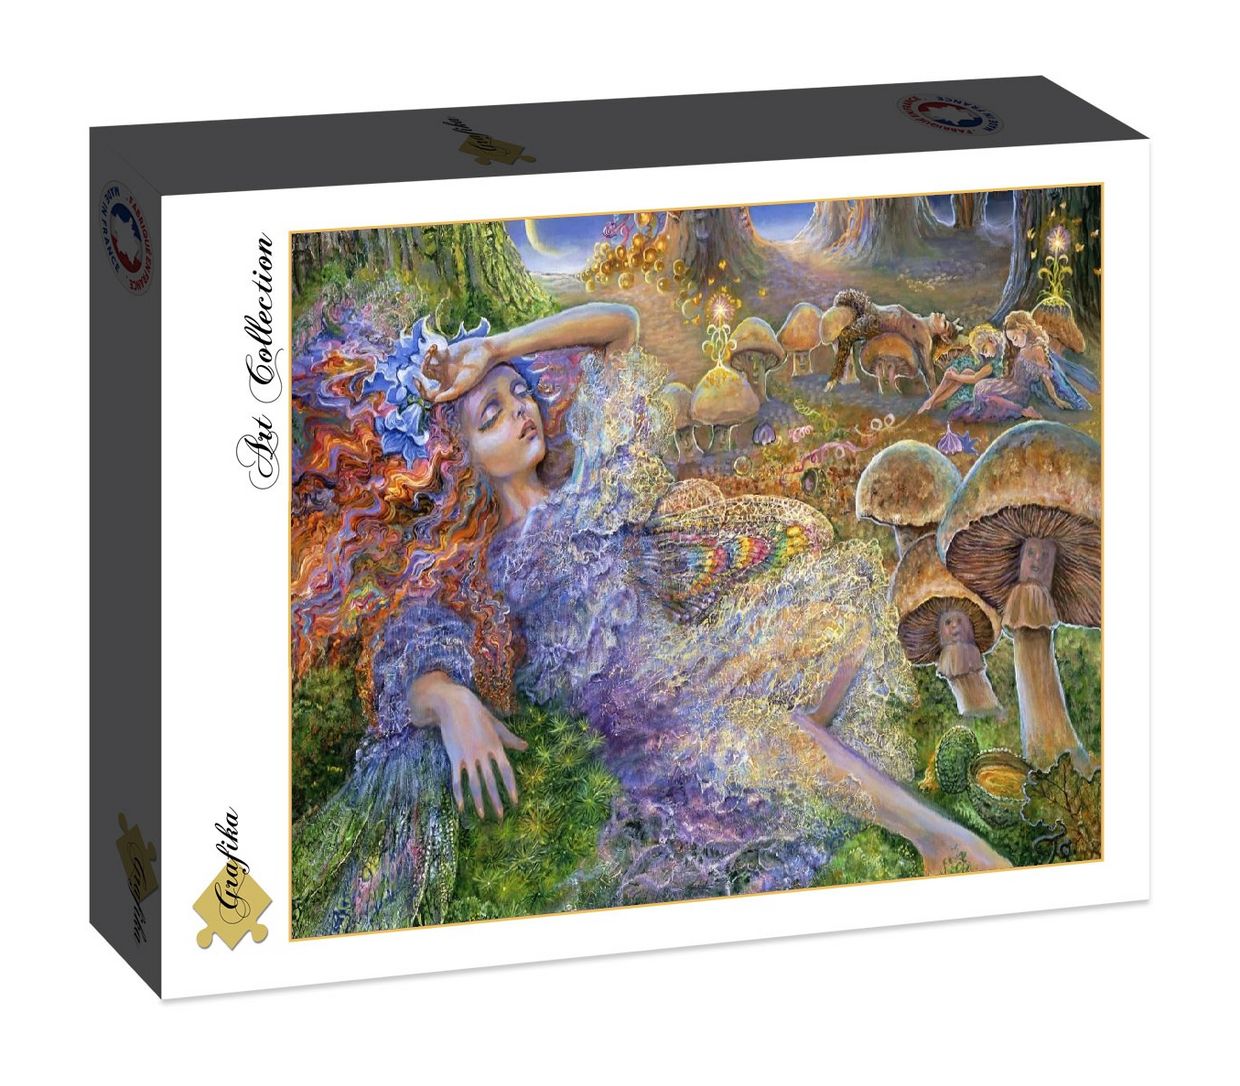 Puzzel - Josephine Wall: After the Fairy Ball (1500)